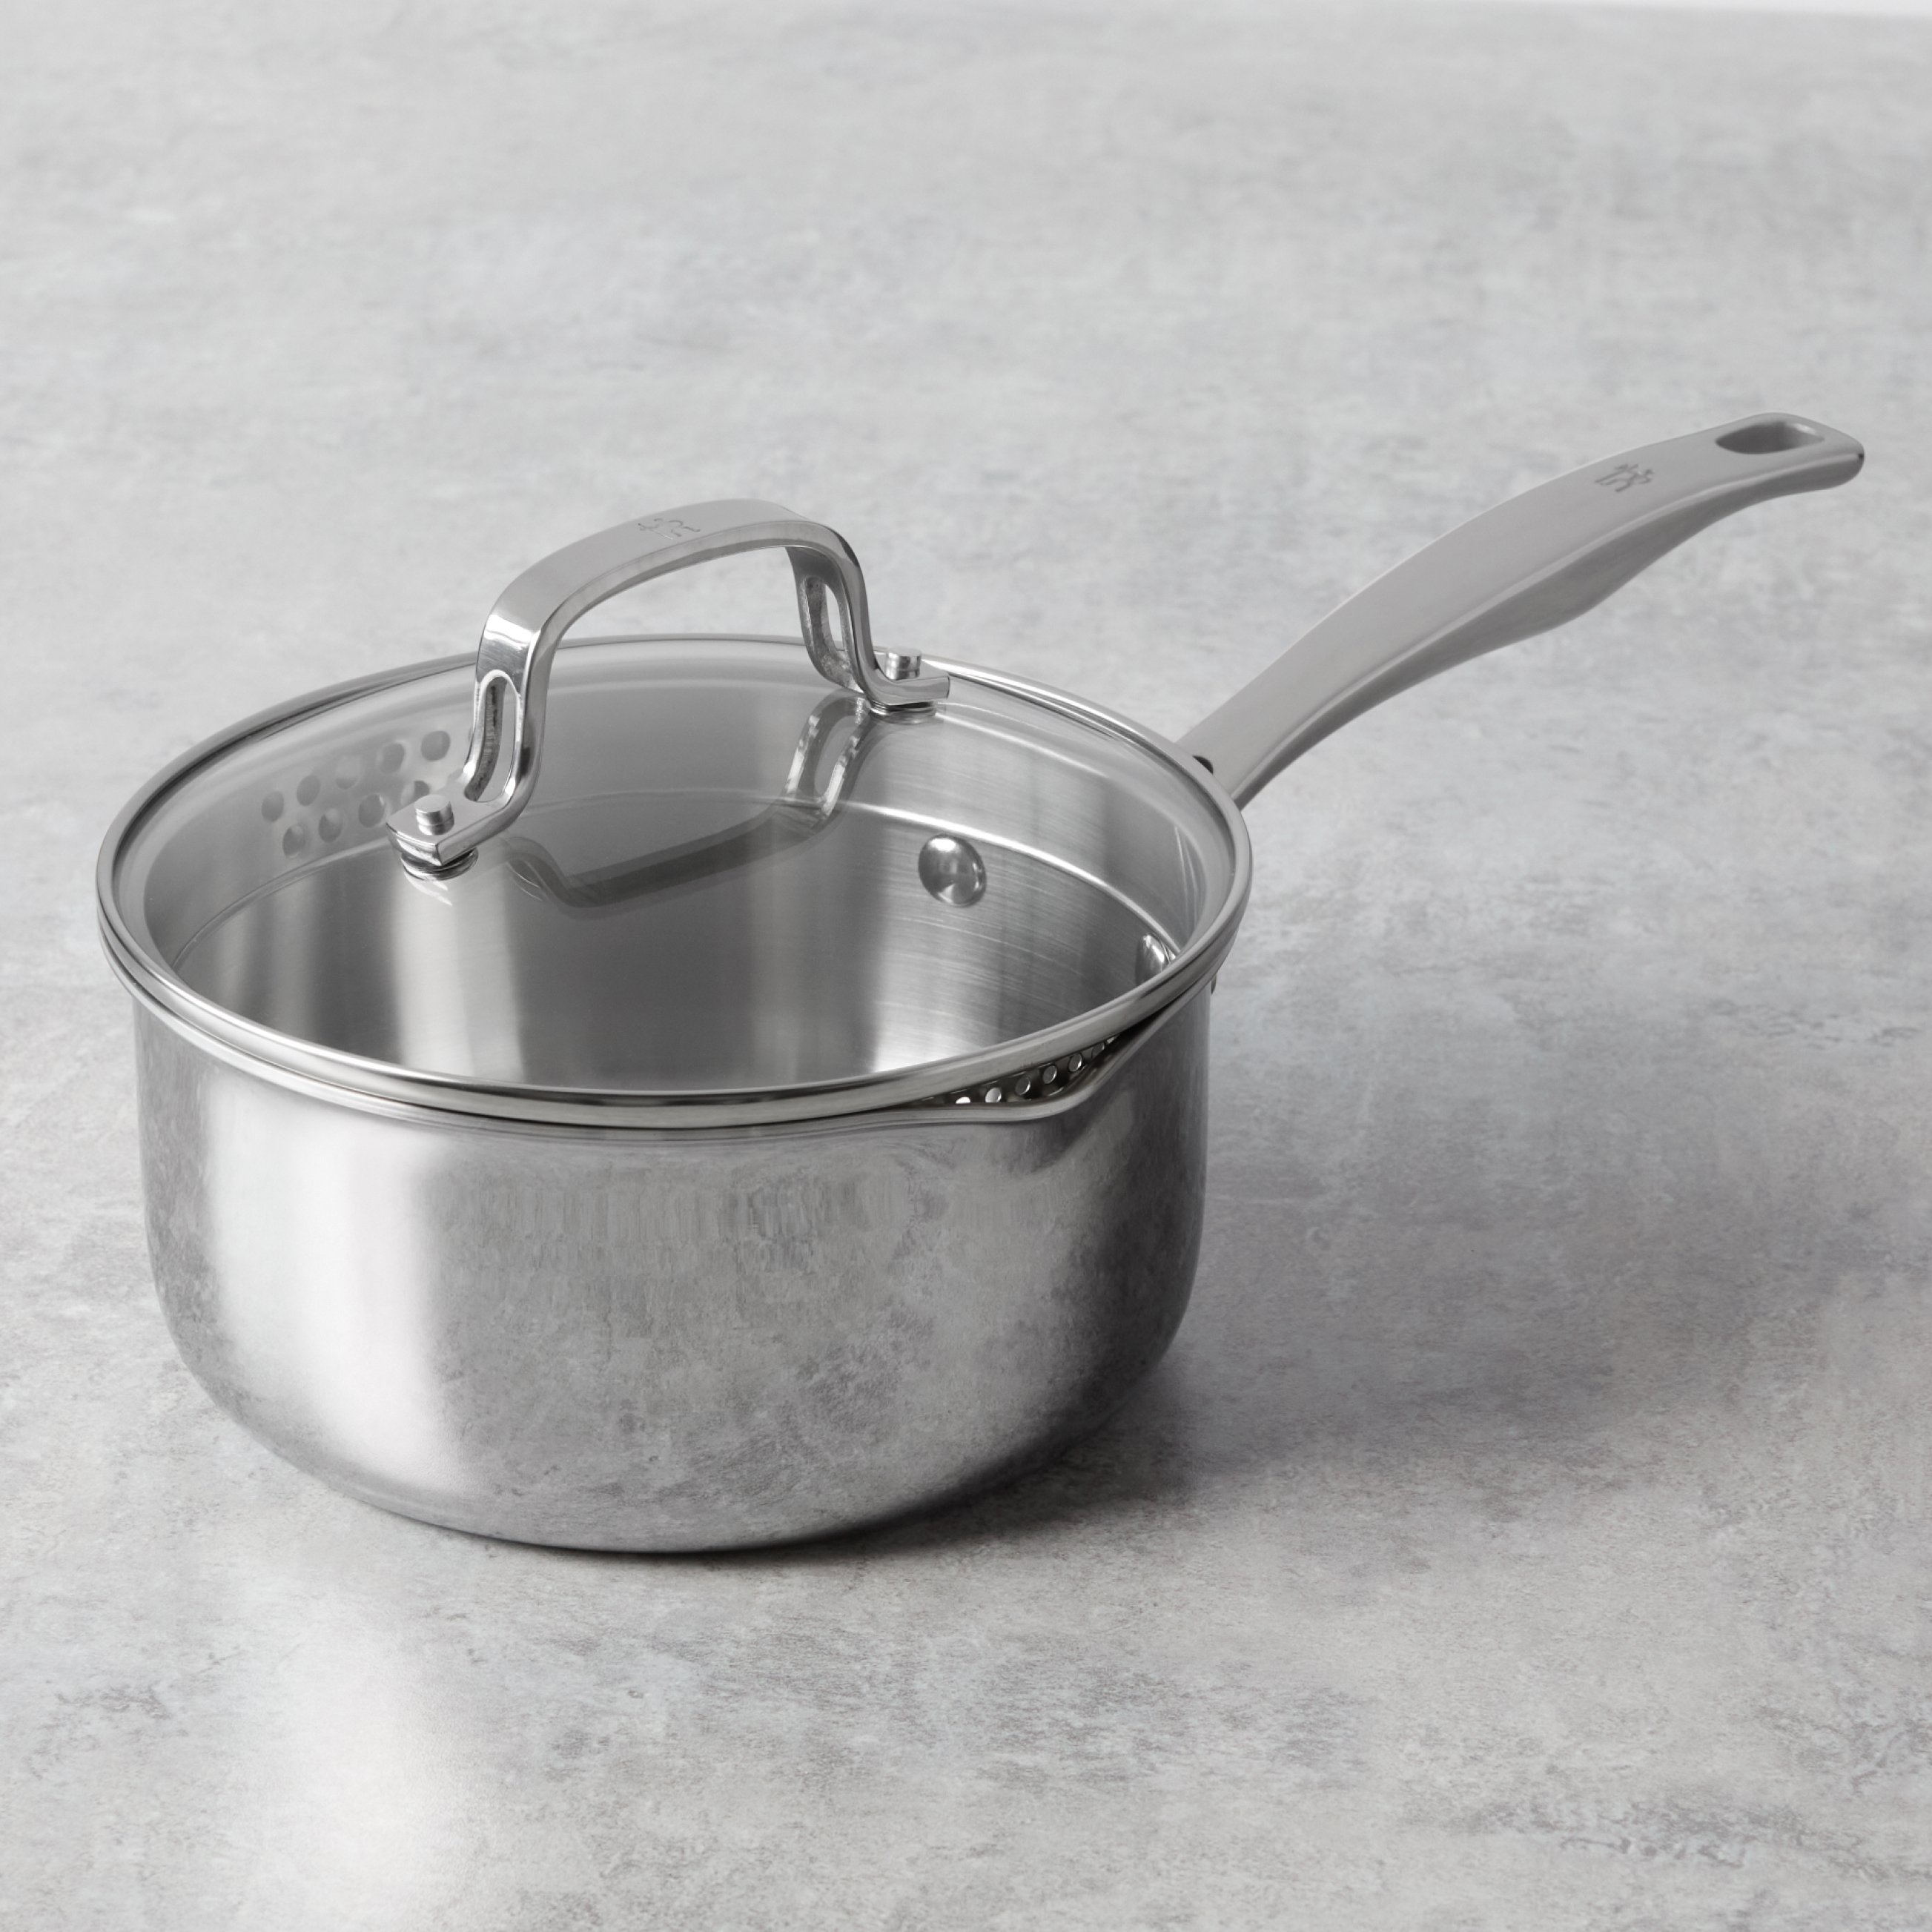 https://www.zwilling.com/on/demandware.static/-/Sites-zwilling-us-Library/default/dw4b5eaa4e/images/product-content/masonry-content/henckels/cookware/henckels-h3/H3UNCOATED_06.jpg